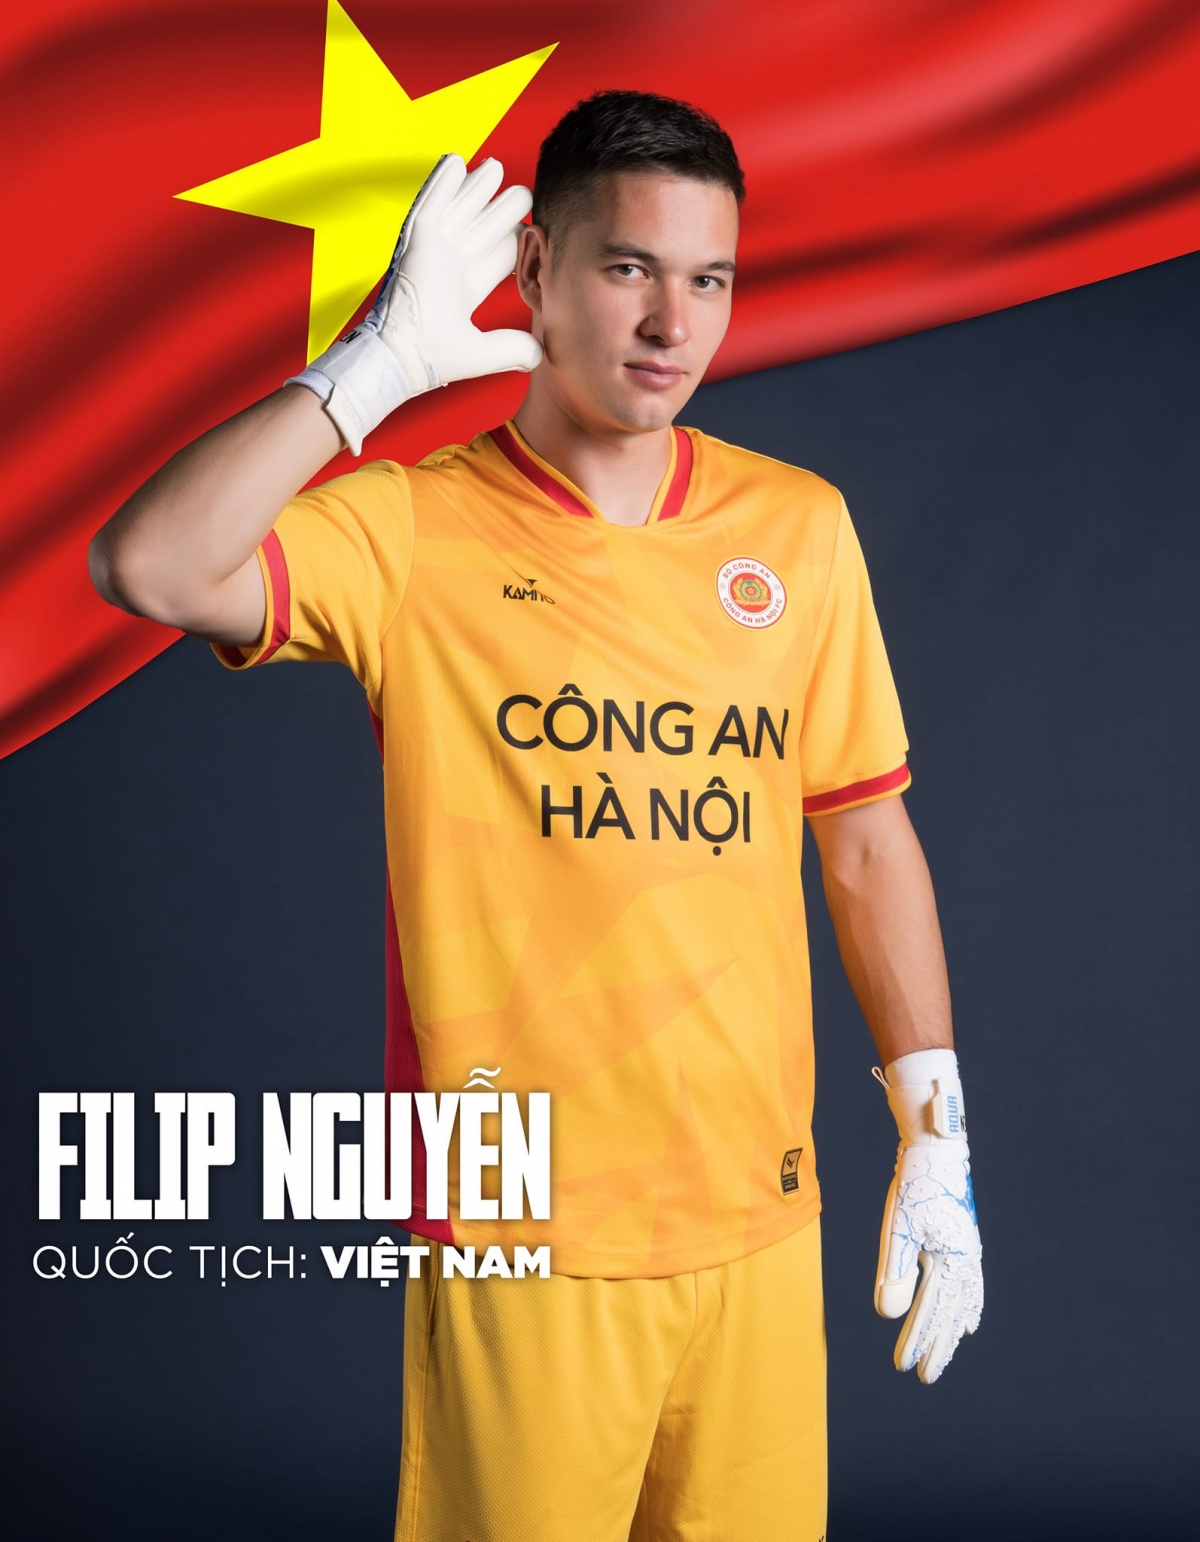 filip nguyen co quoc tich viet nam hlv troussier tinh the nao hinh anh 1